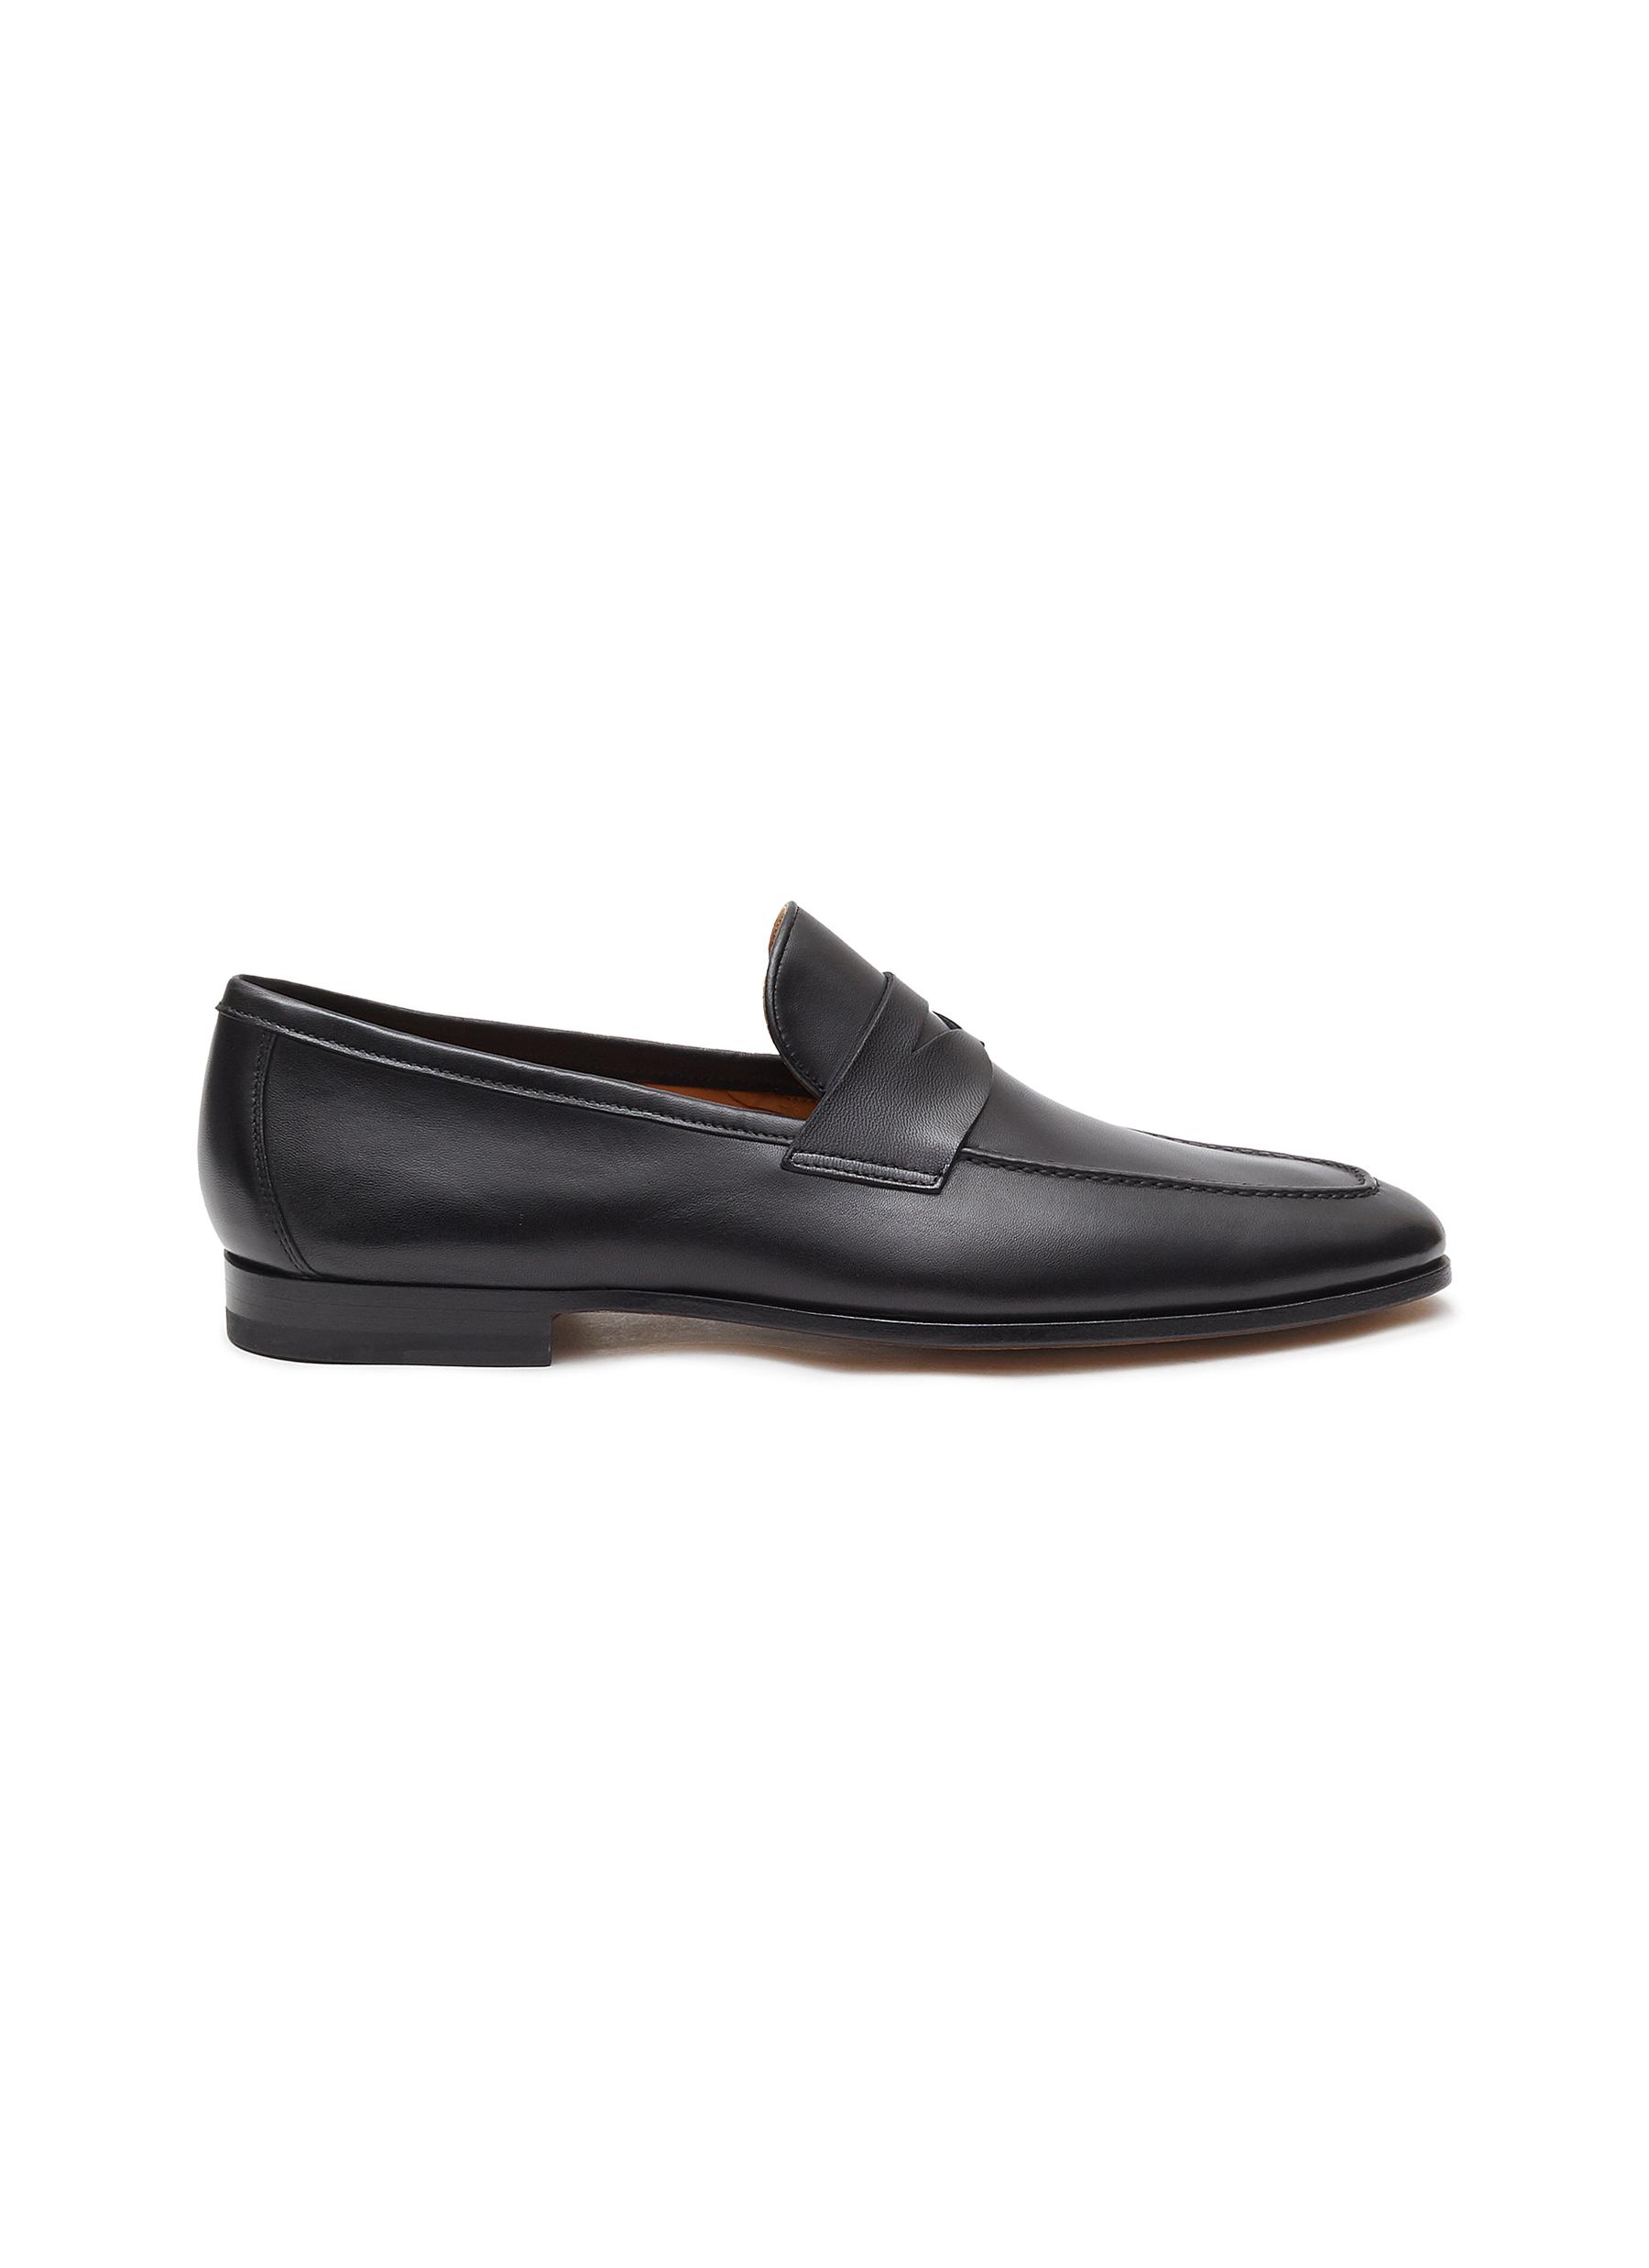 MAGNANNI Apron Toe Leather Penny Loafers